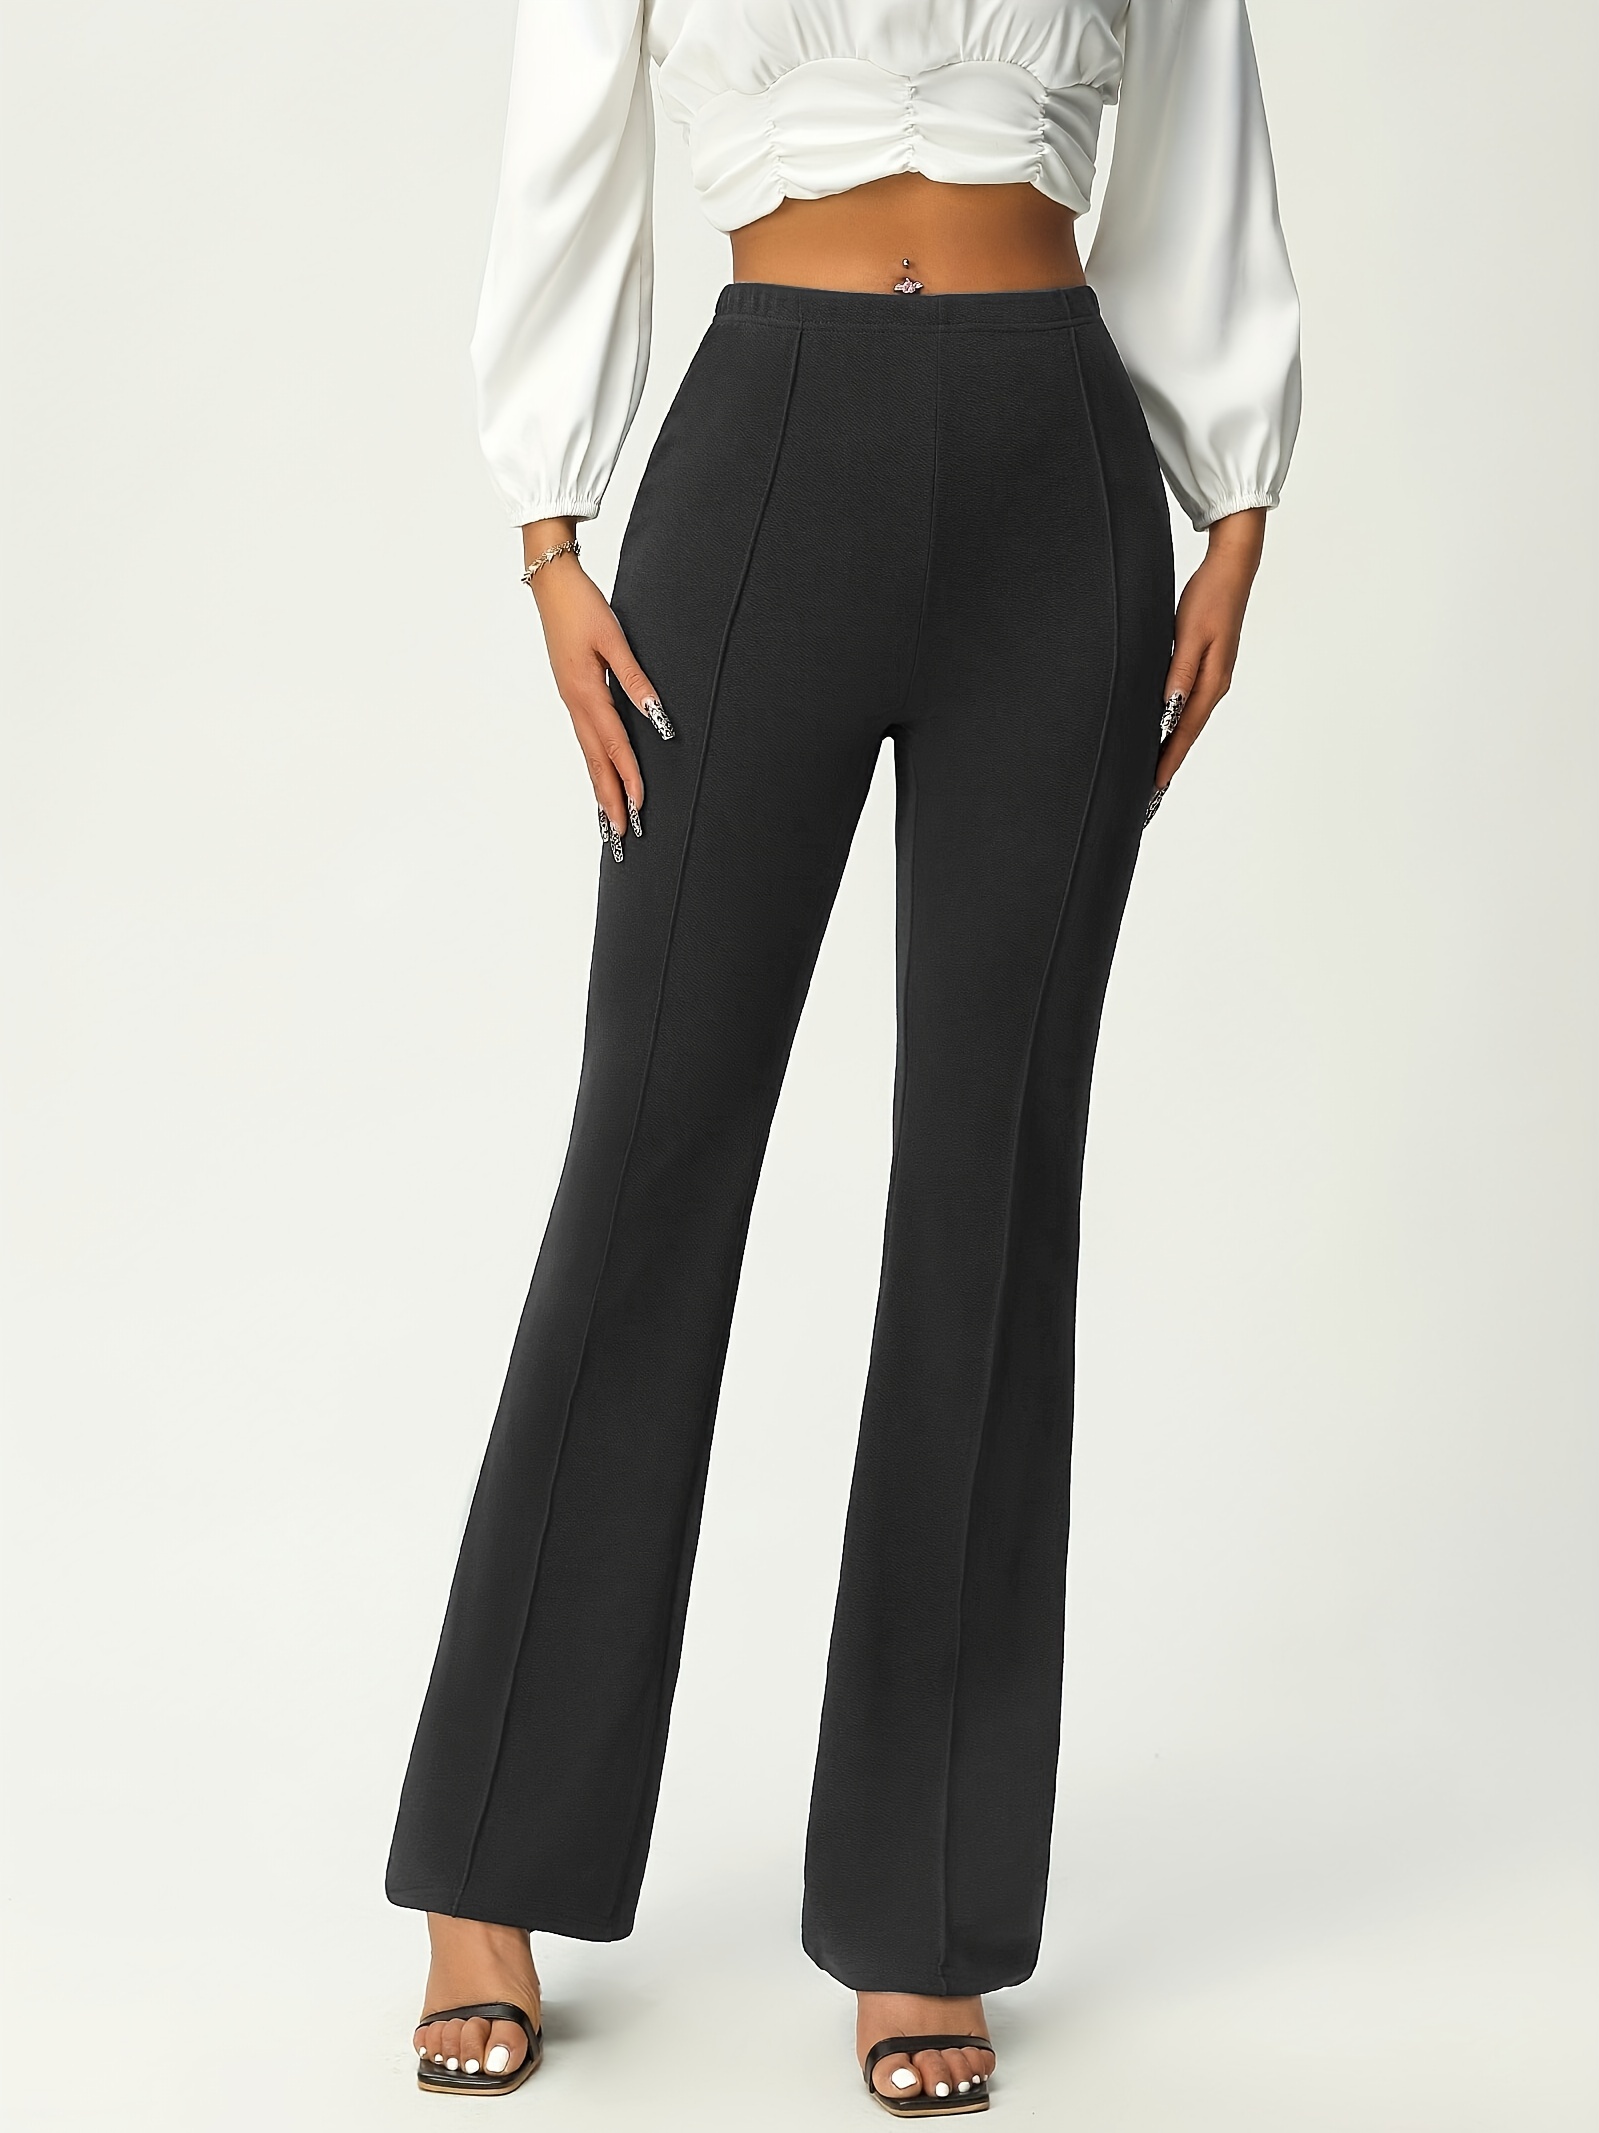 solid flare leg pants elegant stretchy high waist pants for work office womens clothing